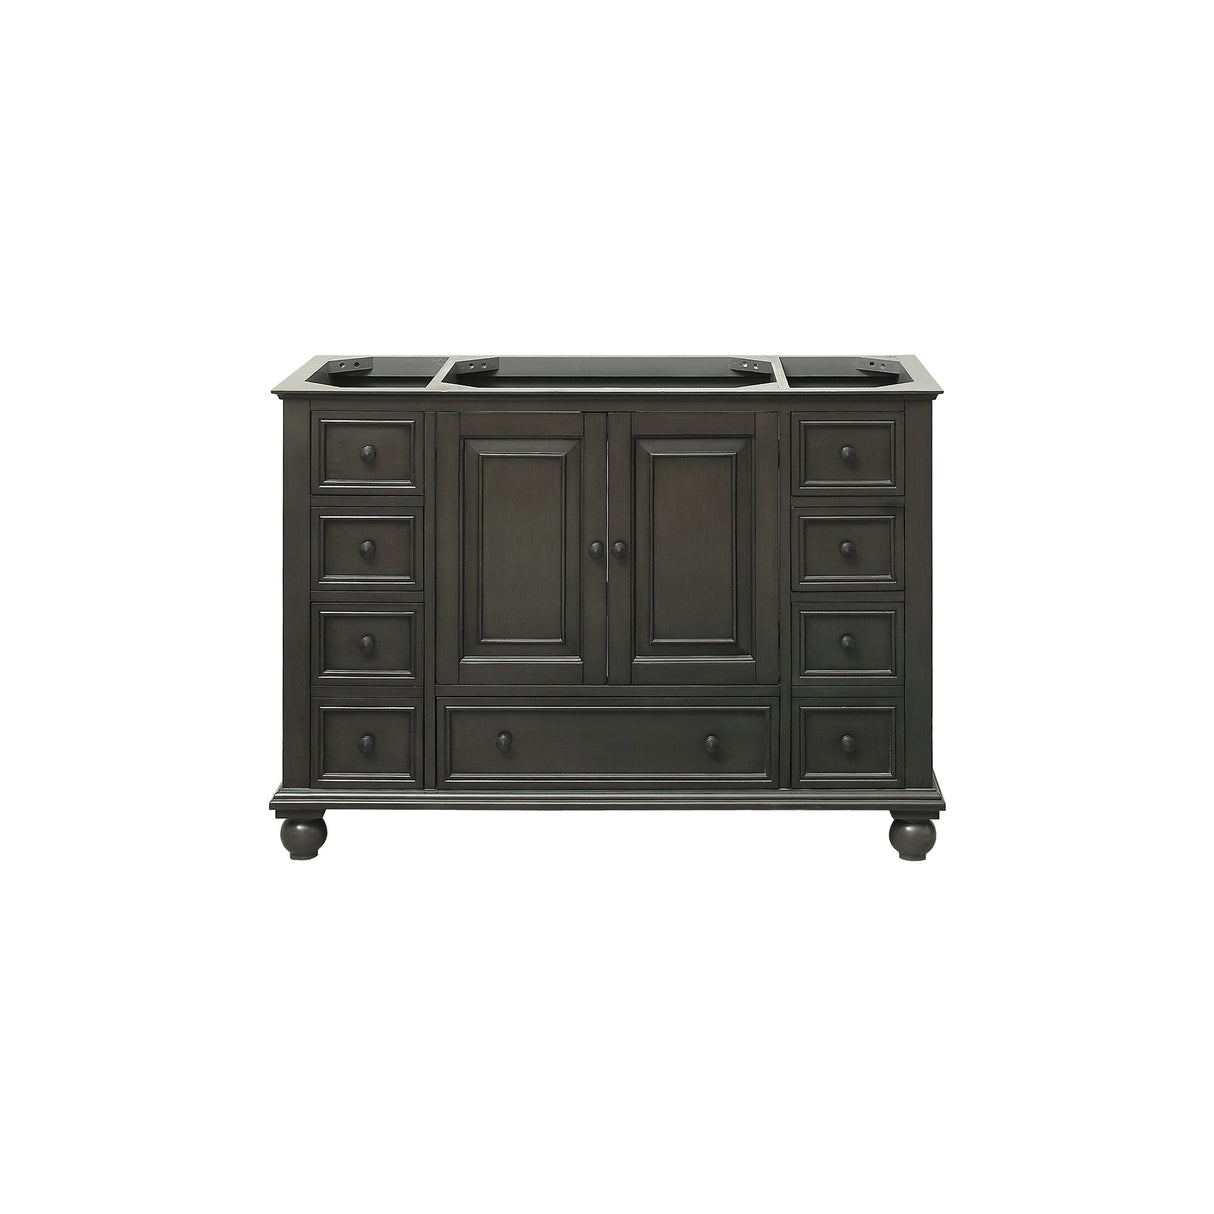 Avanity Thompson 48 in. Vanity Only in Charcoal Glaze finish